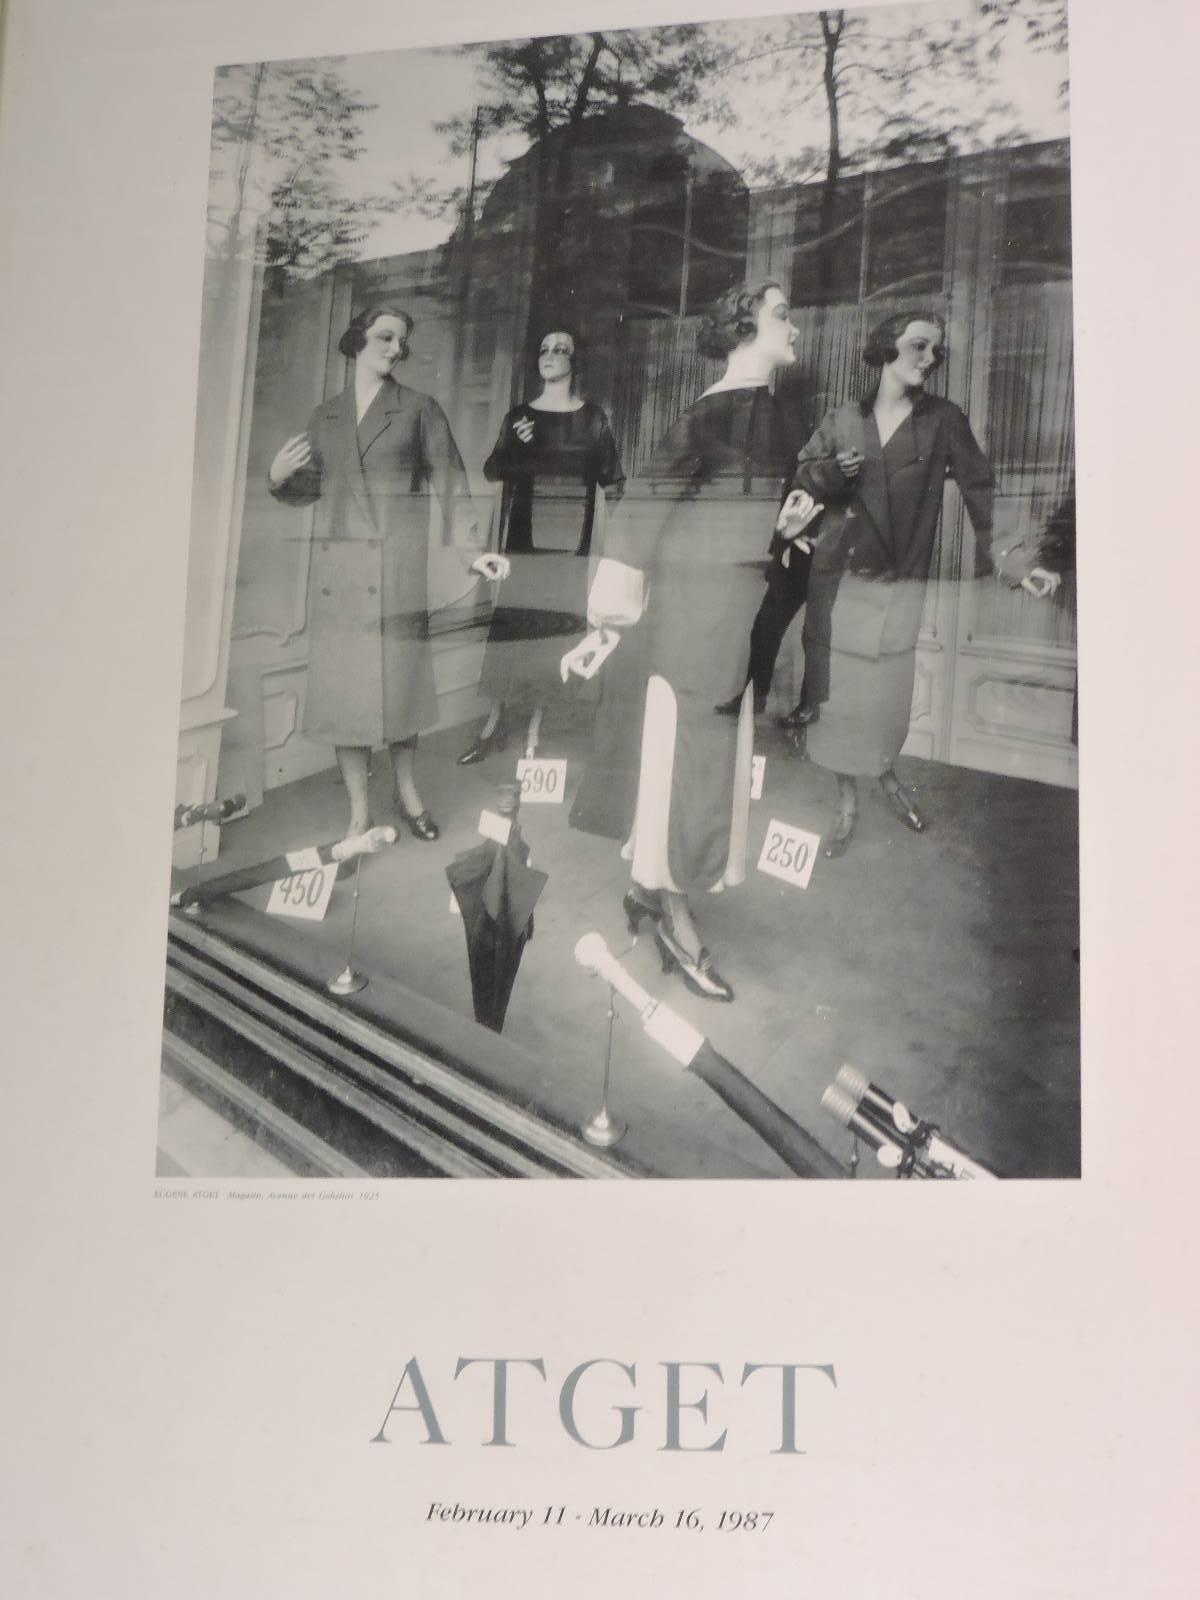 Paper Eugene Atget Exhibition Poster, International Museum of Photography, 1987